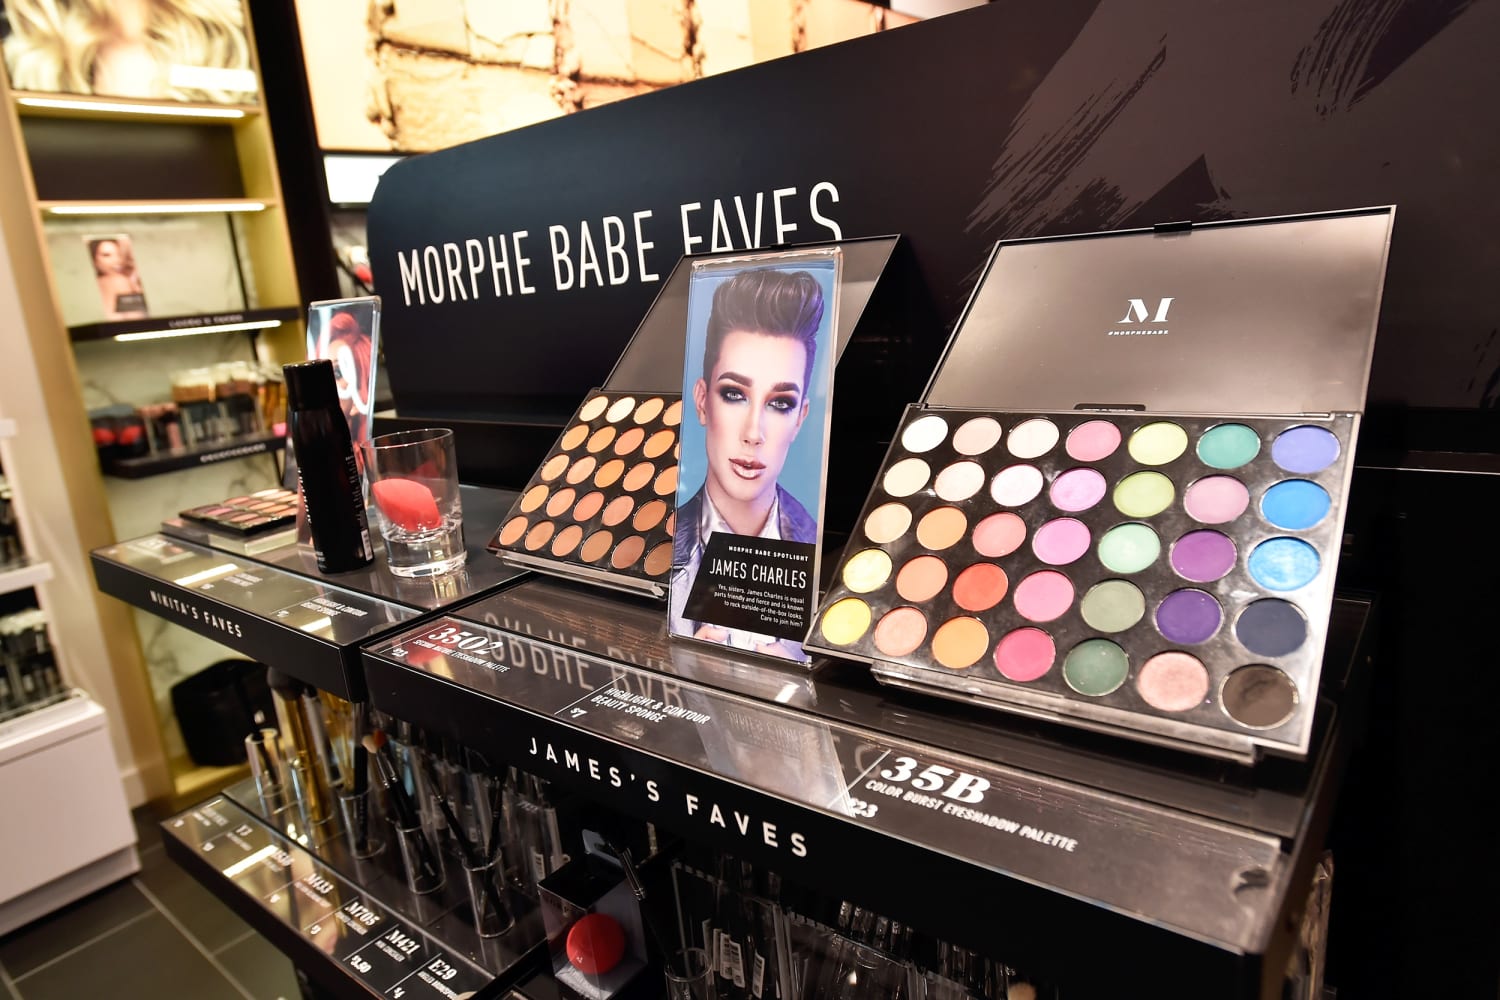 Morphe Cosmetics closing all U.S. retail stores. Employees say they left the dark.